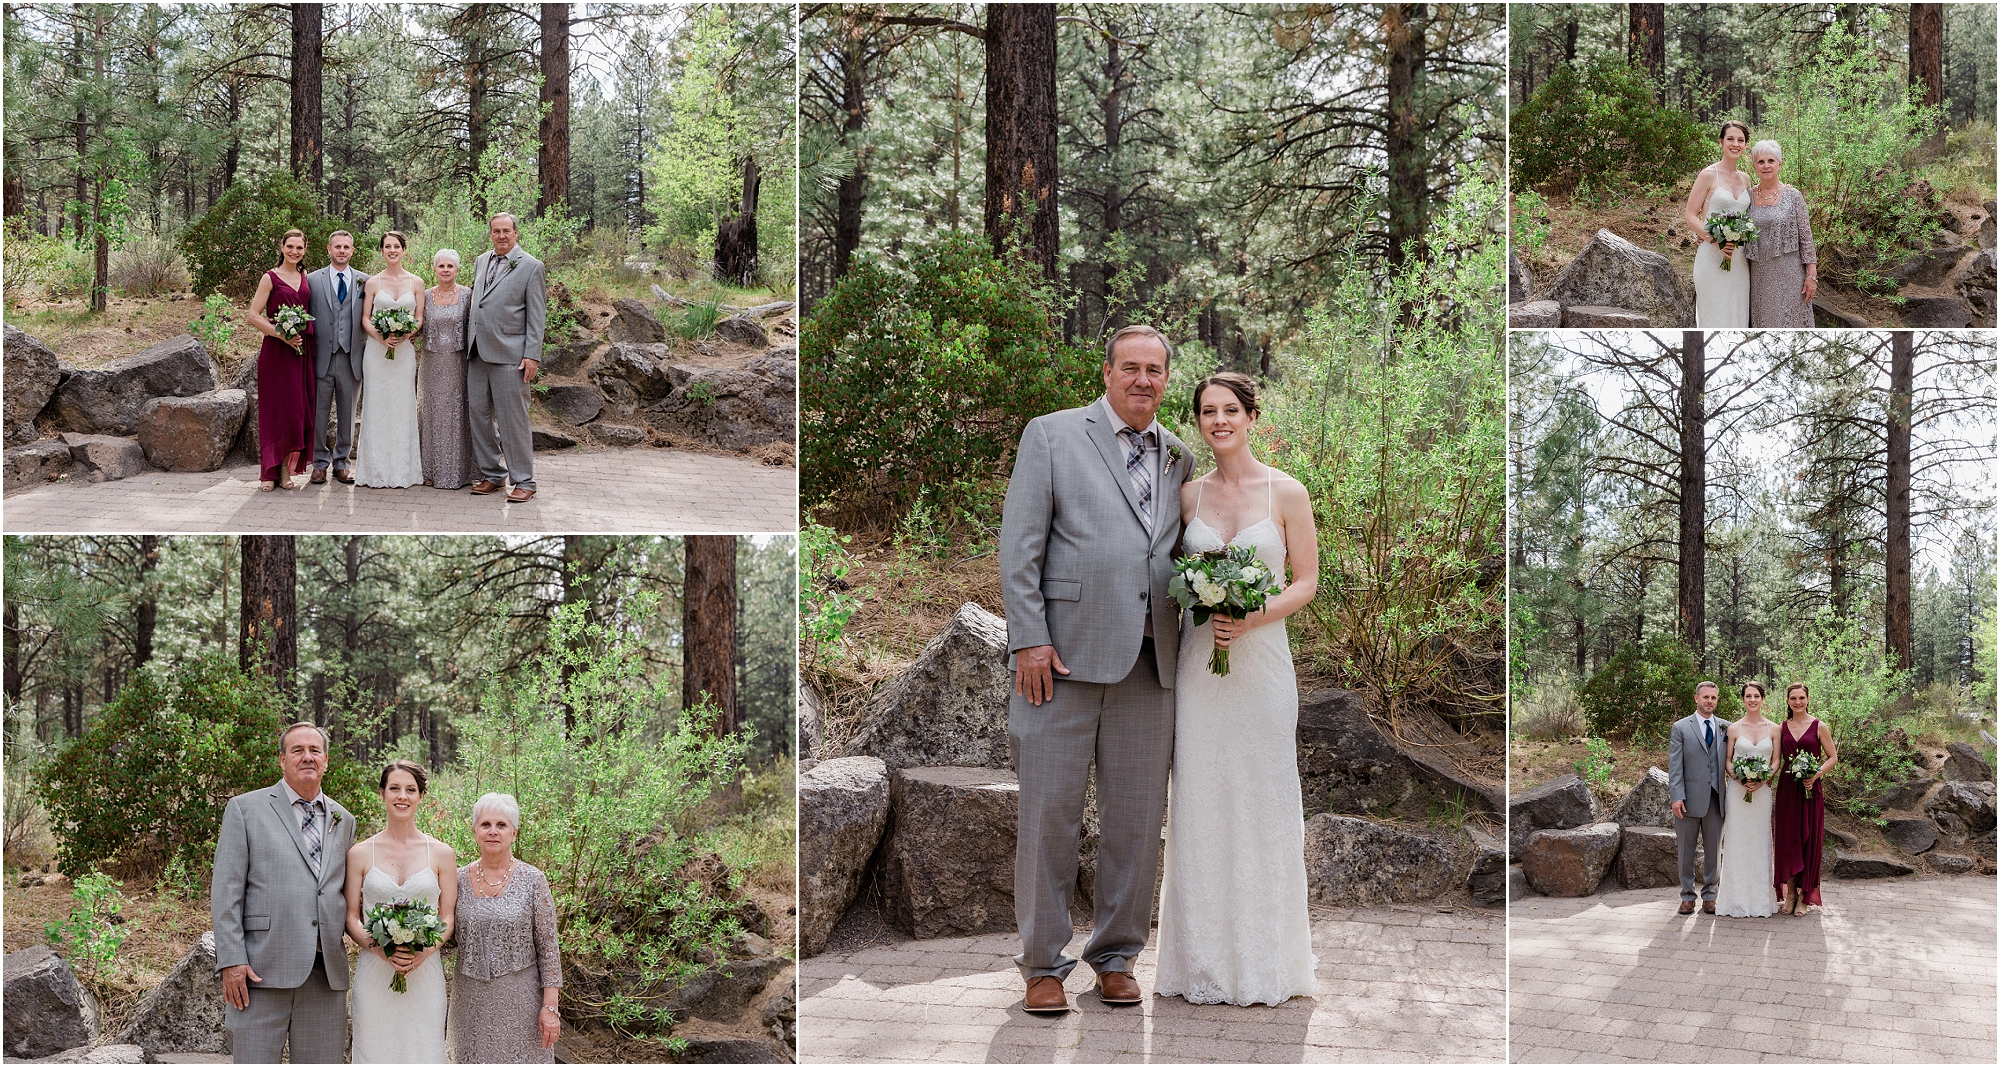 The bride and her family at a Bend, OR wedding at the High Desert Museum. | Erica Swantek Photography